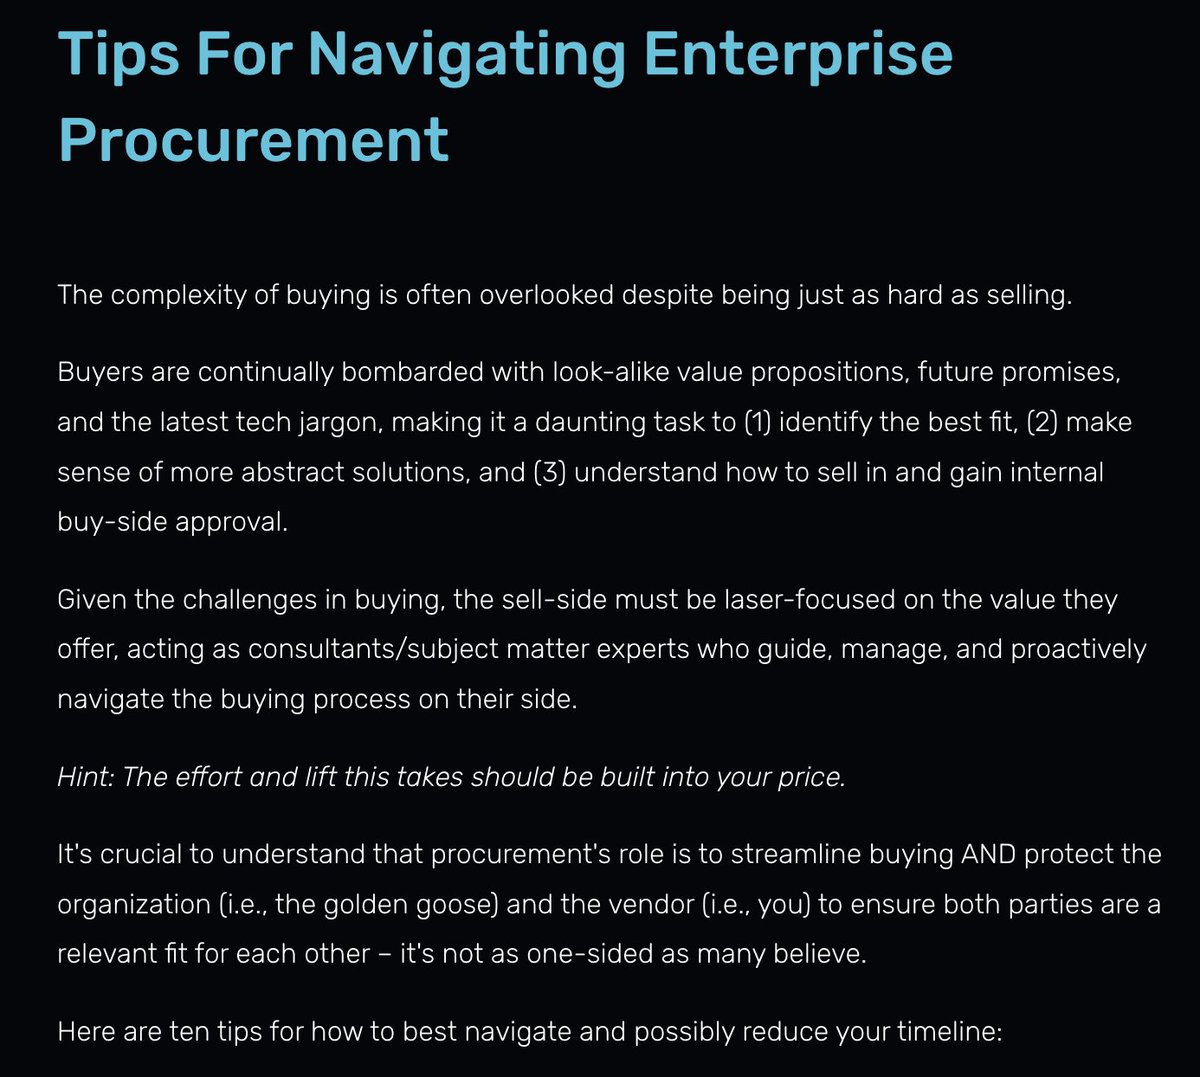 tips for startups navigating enterprise procurement

had it gut-checked by a close friend who oversees Procurement at a Fortune10 company -- so it's got some extra validation ;) 

biggest takeaway - buying is just as hard as selling

more below